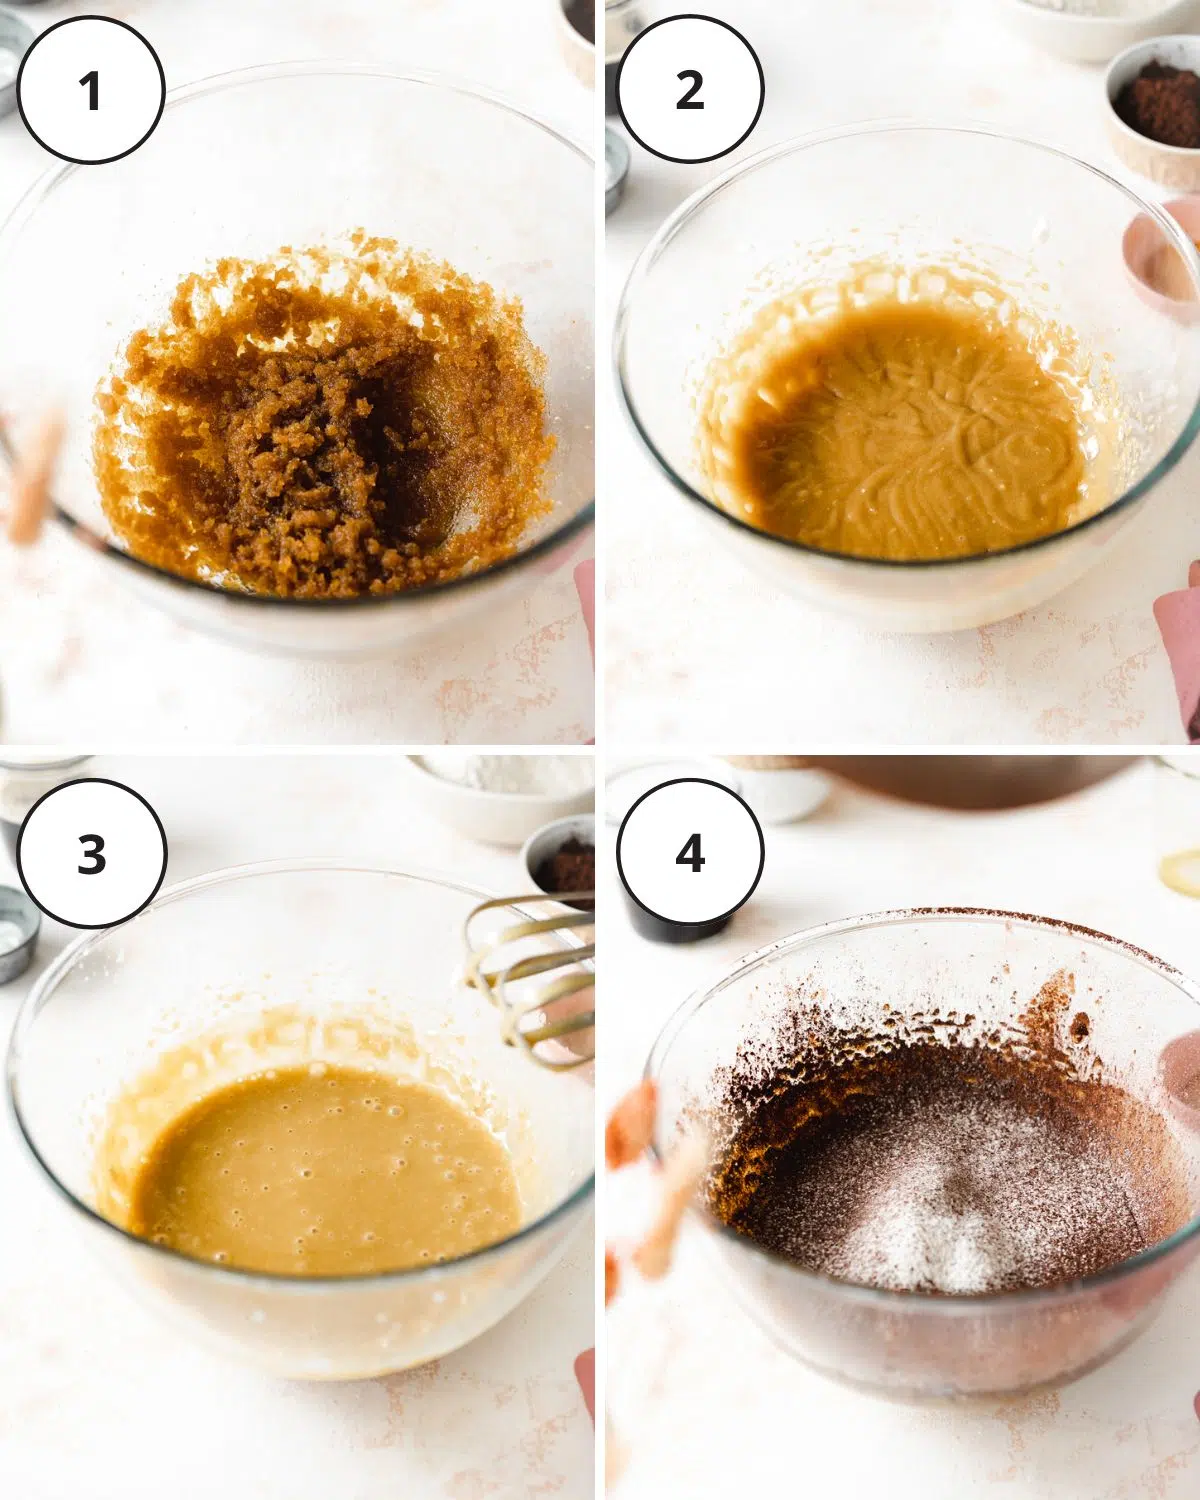 mixing olive oil, milk, and dry ingredients for chocolate cupcakes in a large glass bowl.